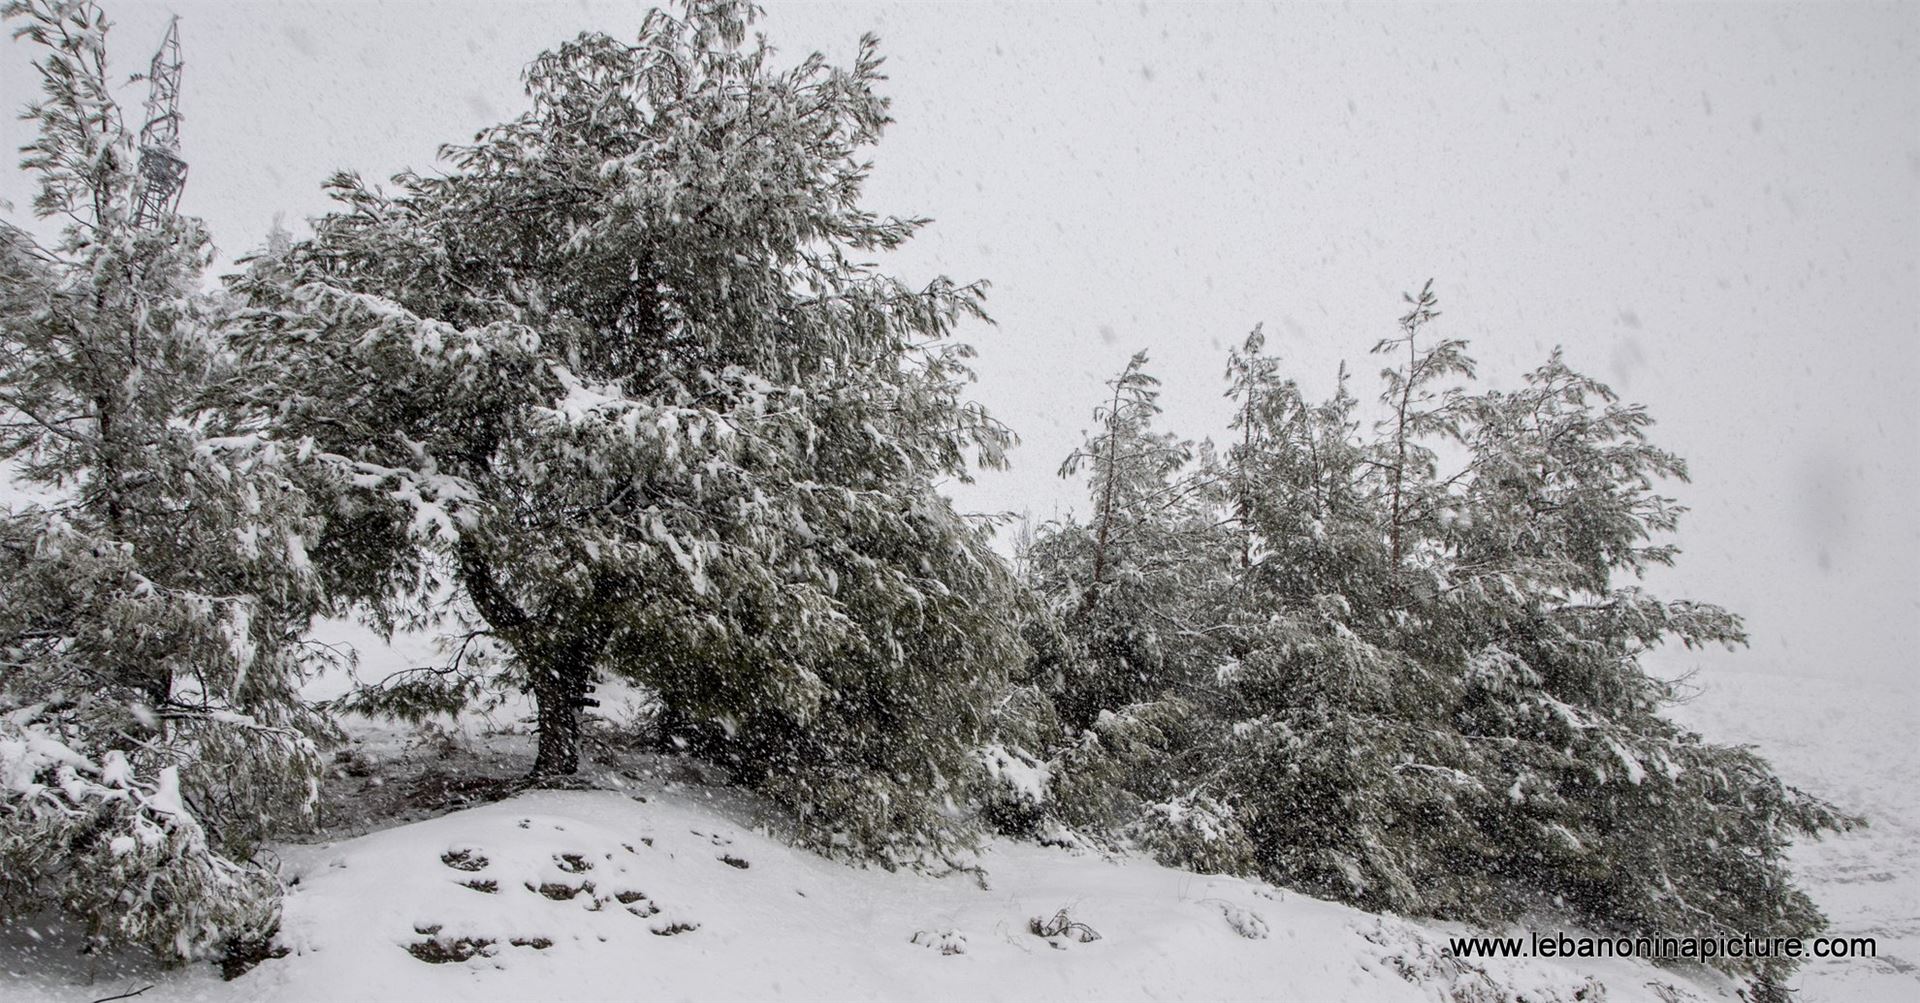 Trees and Roads Covered by Snow (Wata Joz, Lebanon)